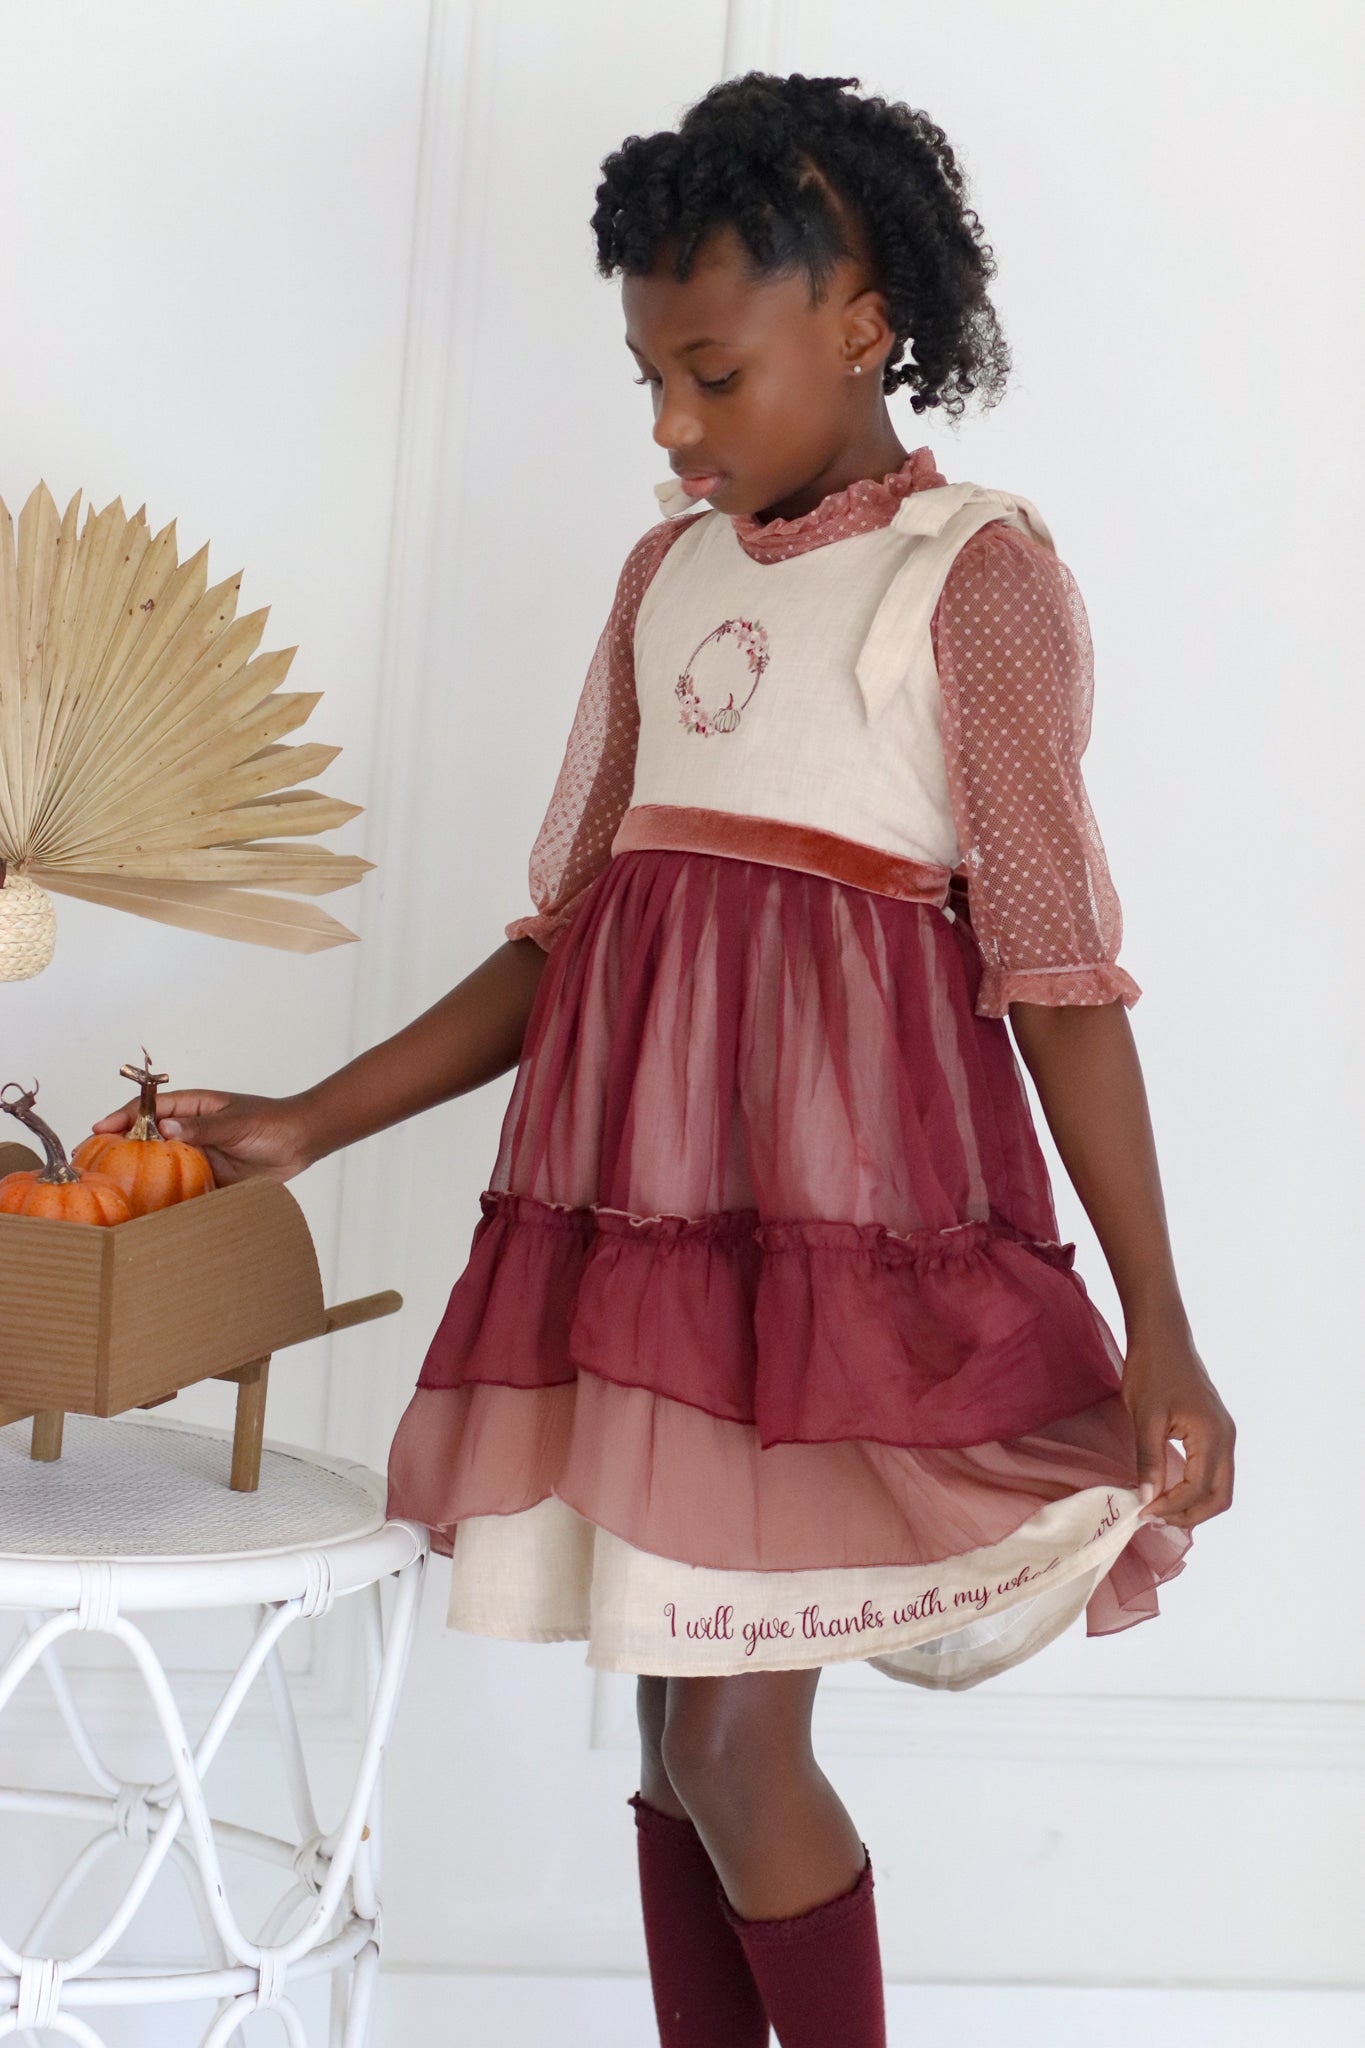 Thankful Heart Wheat, Blush, and Maroon Embroidered Dress and Undershirt - Evie's Closet Clothing